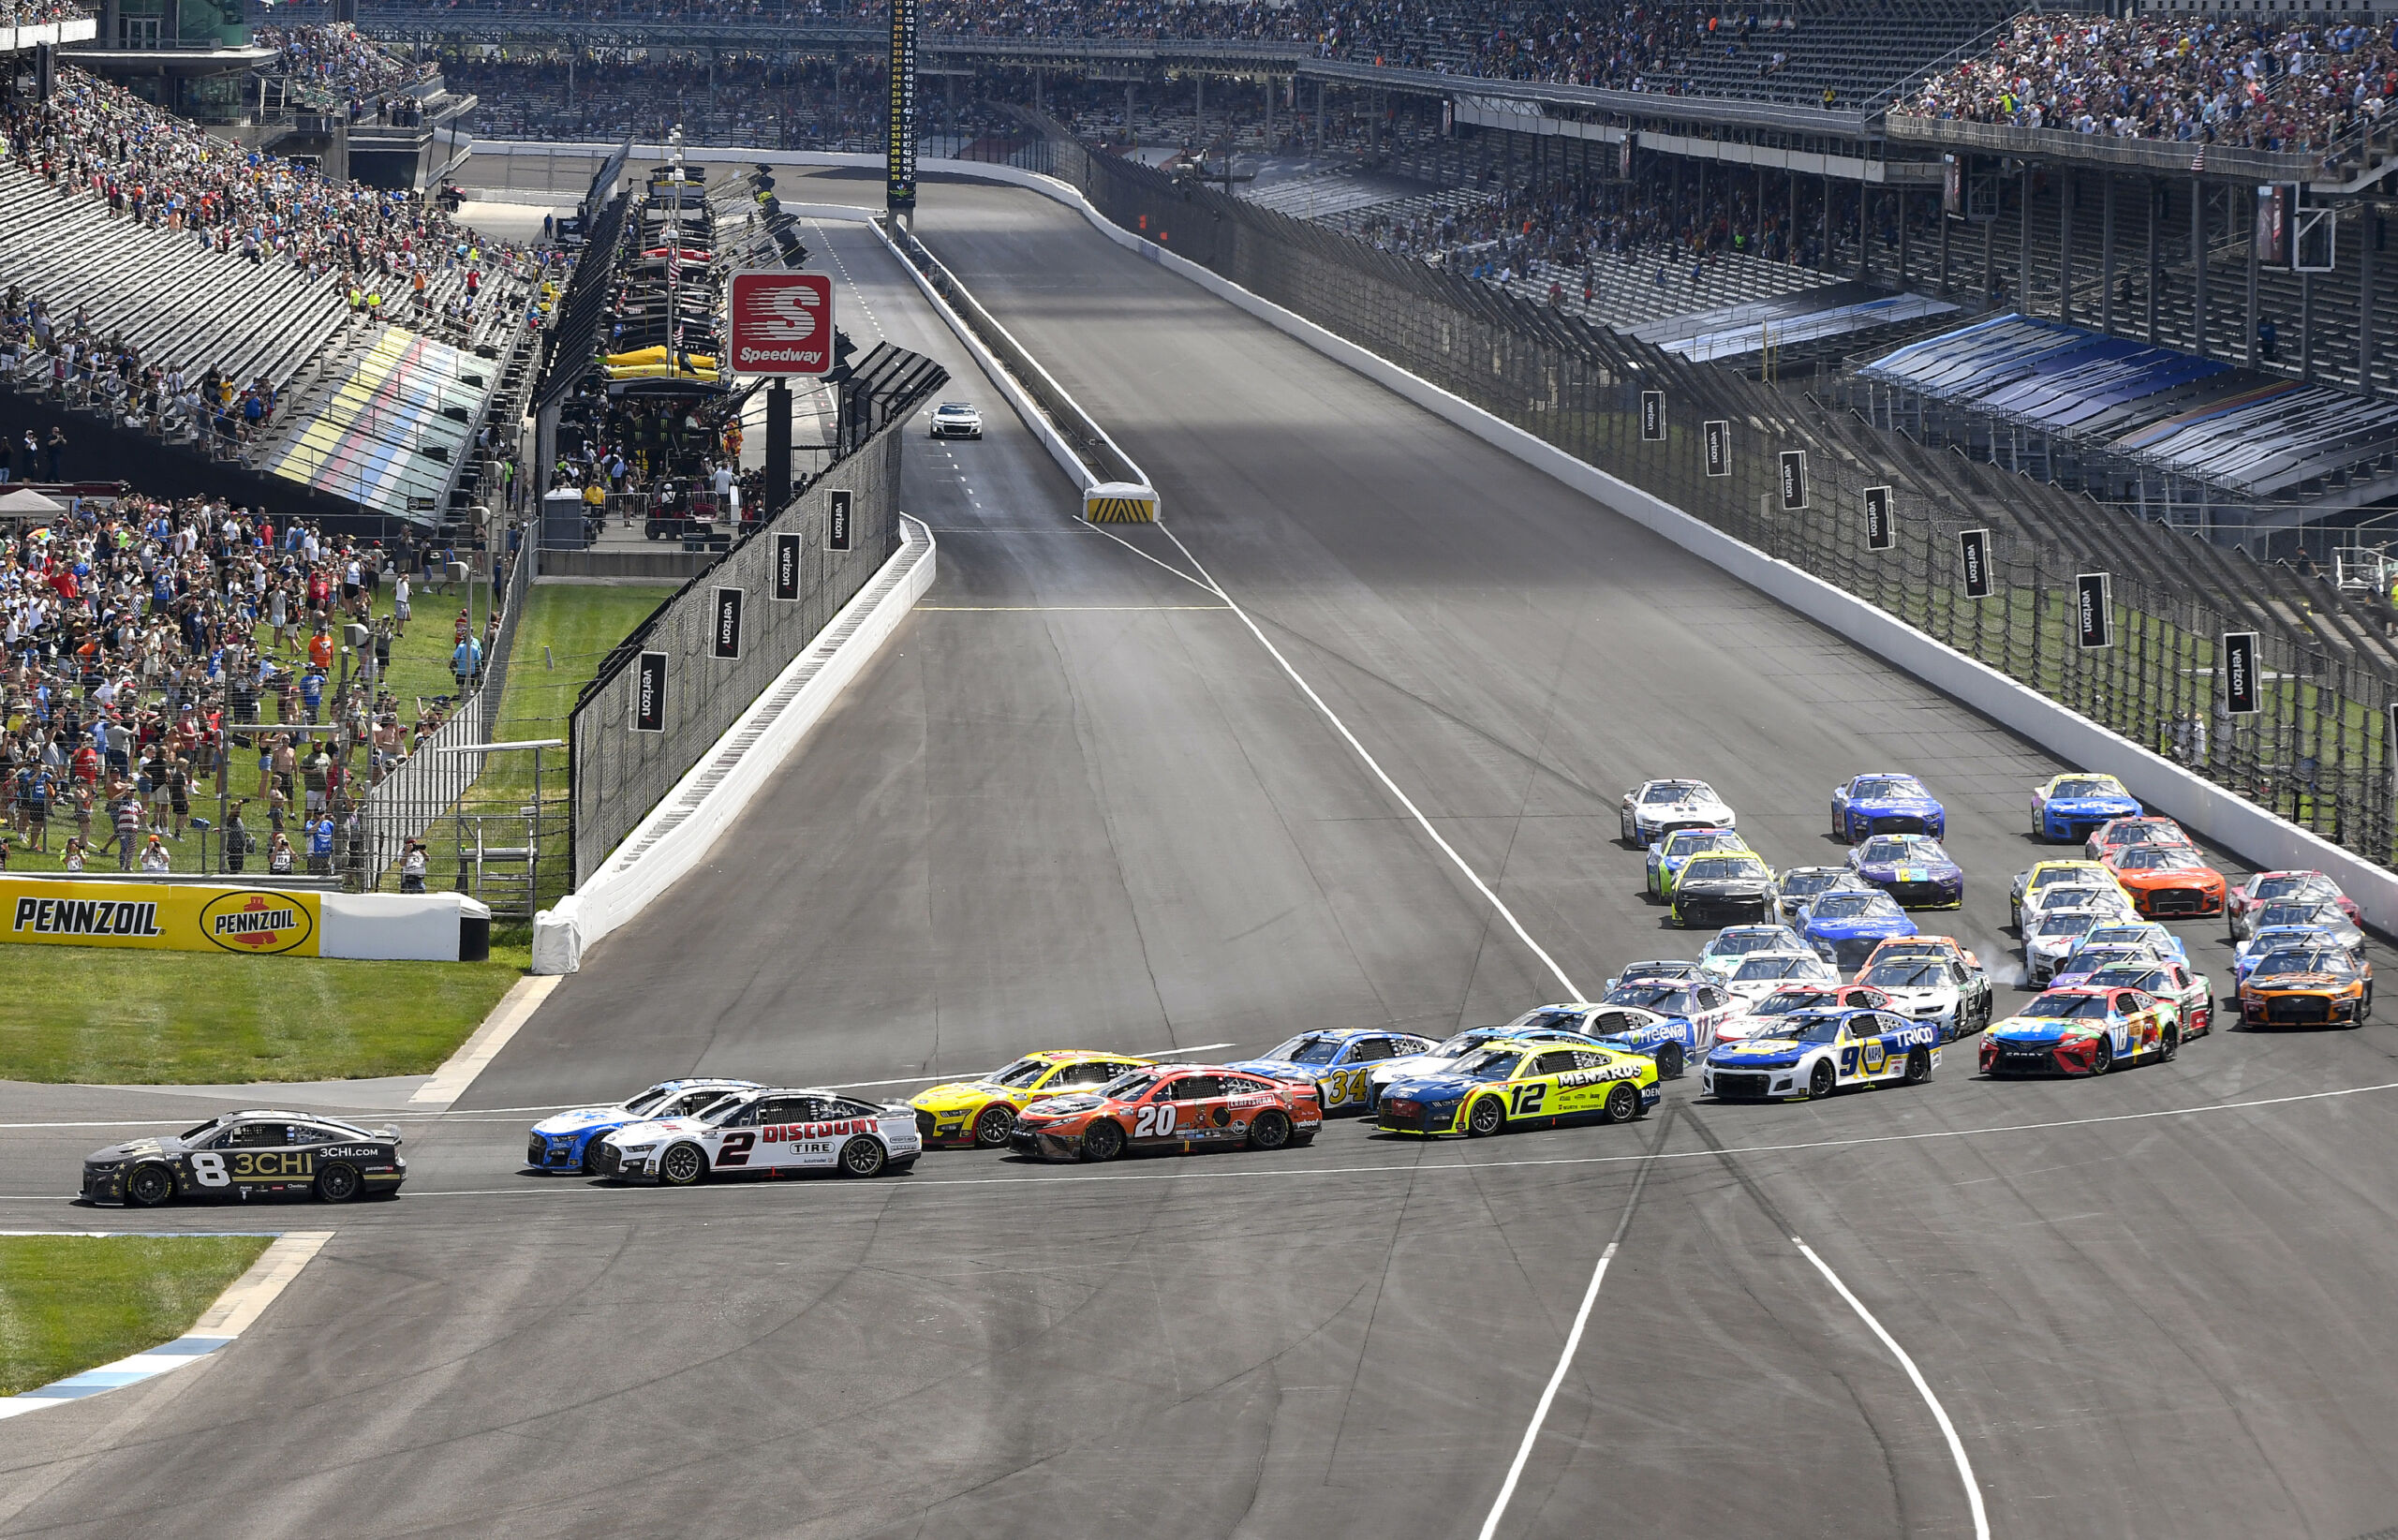 NASCAR Indianapolis race not being broadcast on USA